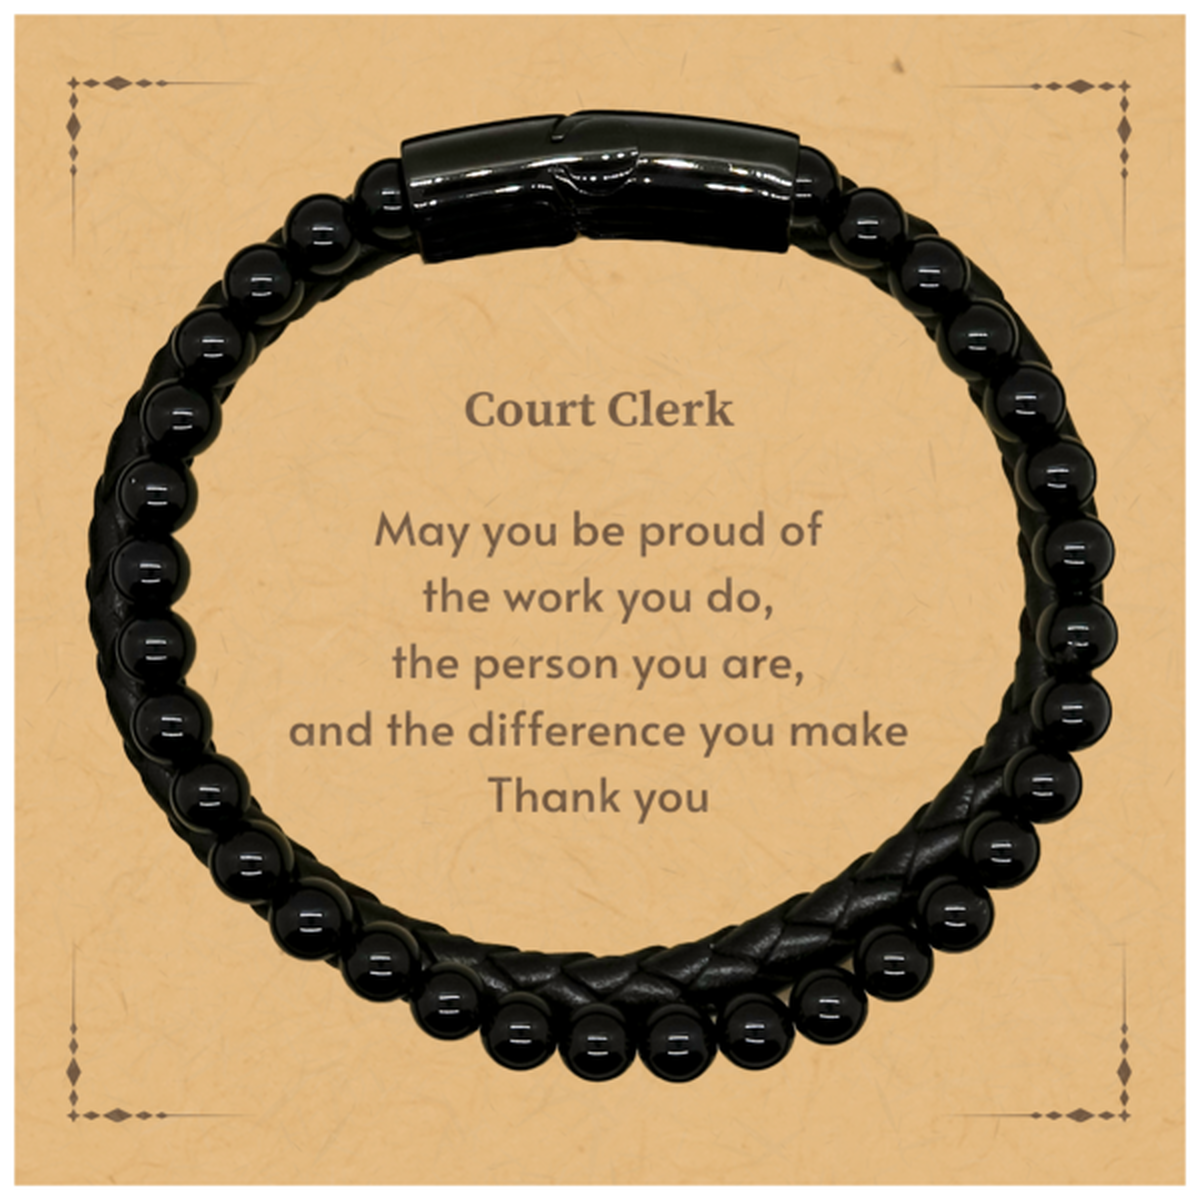 Heartwarming Stone Leather Bracelets Retirement Coworkers Gifts for Court Clerk, Court Clerk May You be proud of the work you do, the person you are Gifts for Boss Men Women Friends